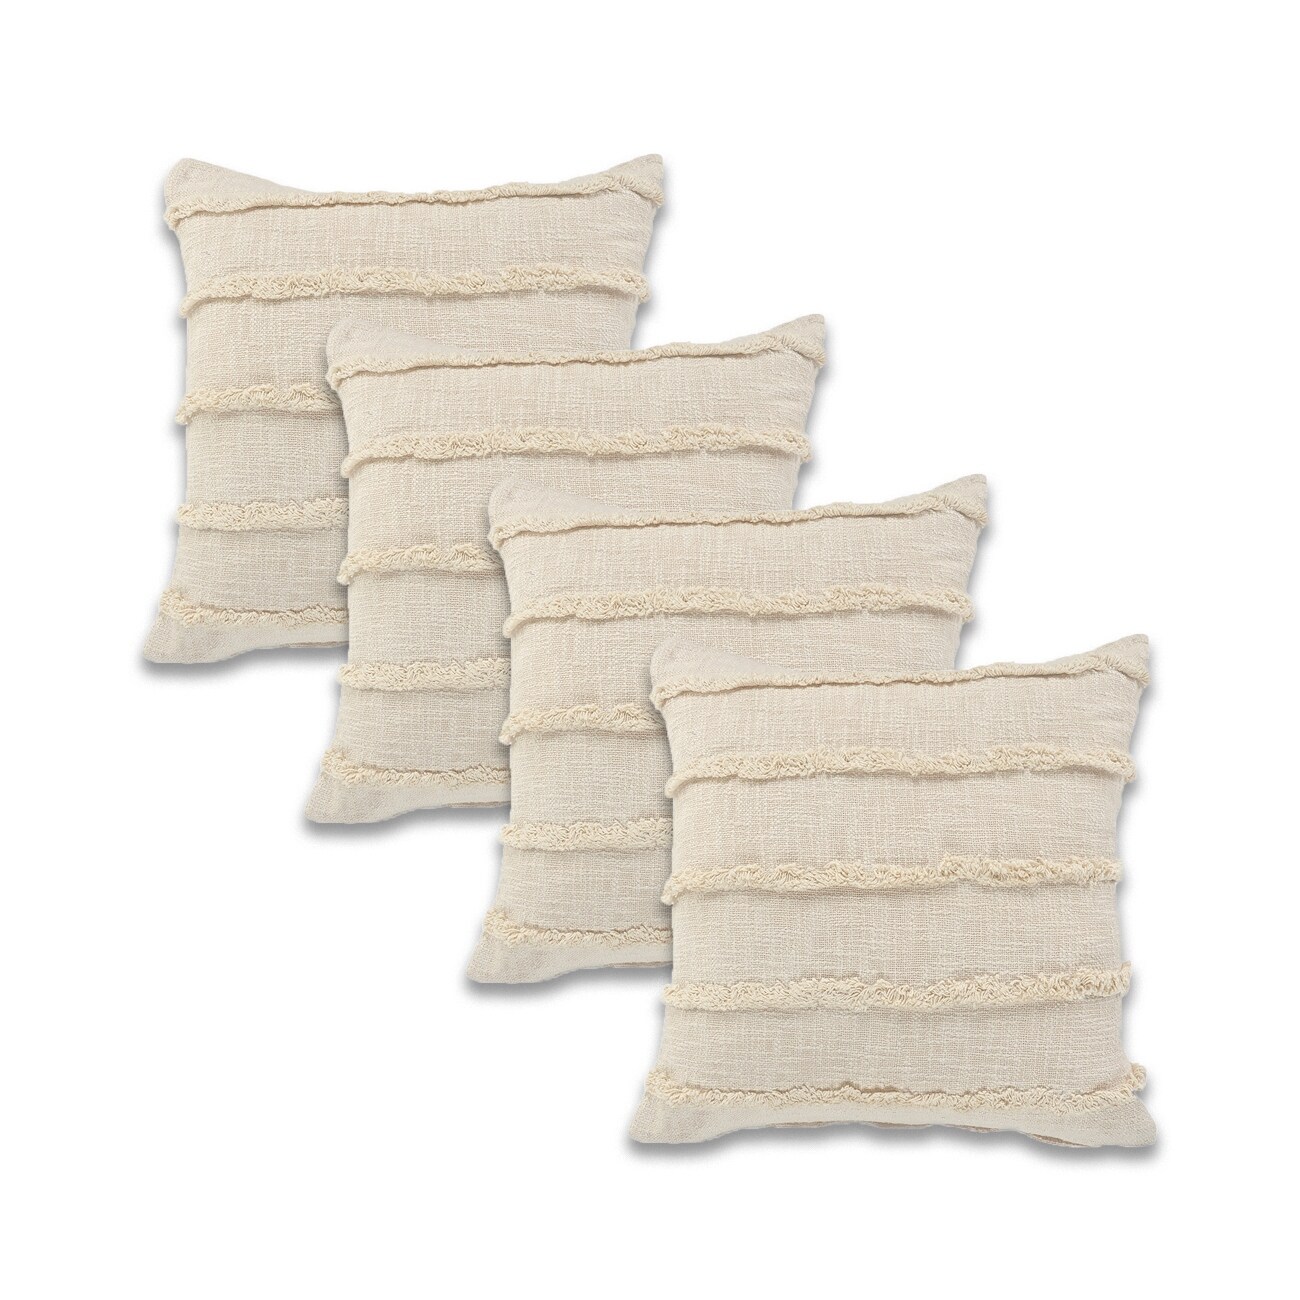 LR Home Birch Solid Natural Cotton Square Pillow, Feather Filled, Set of 2 or 4